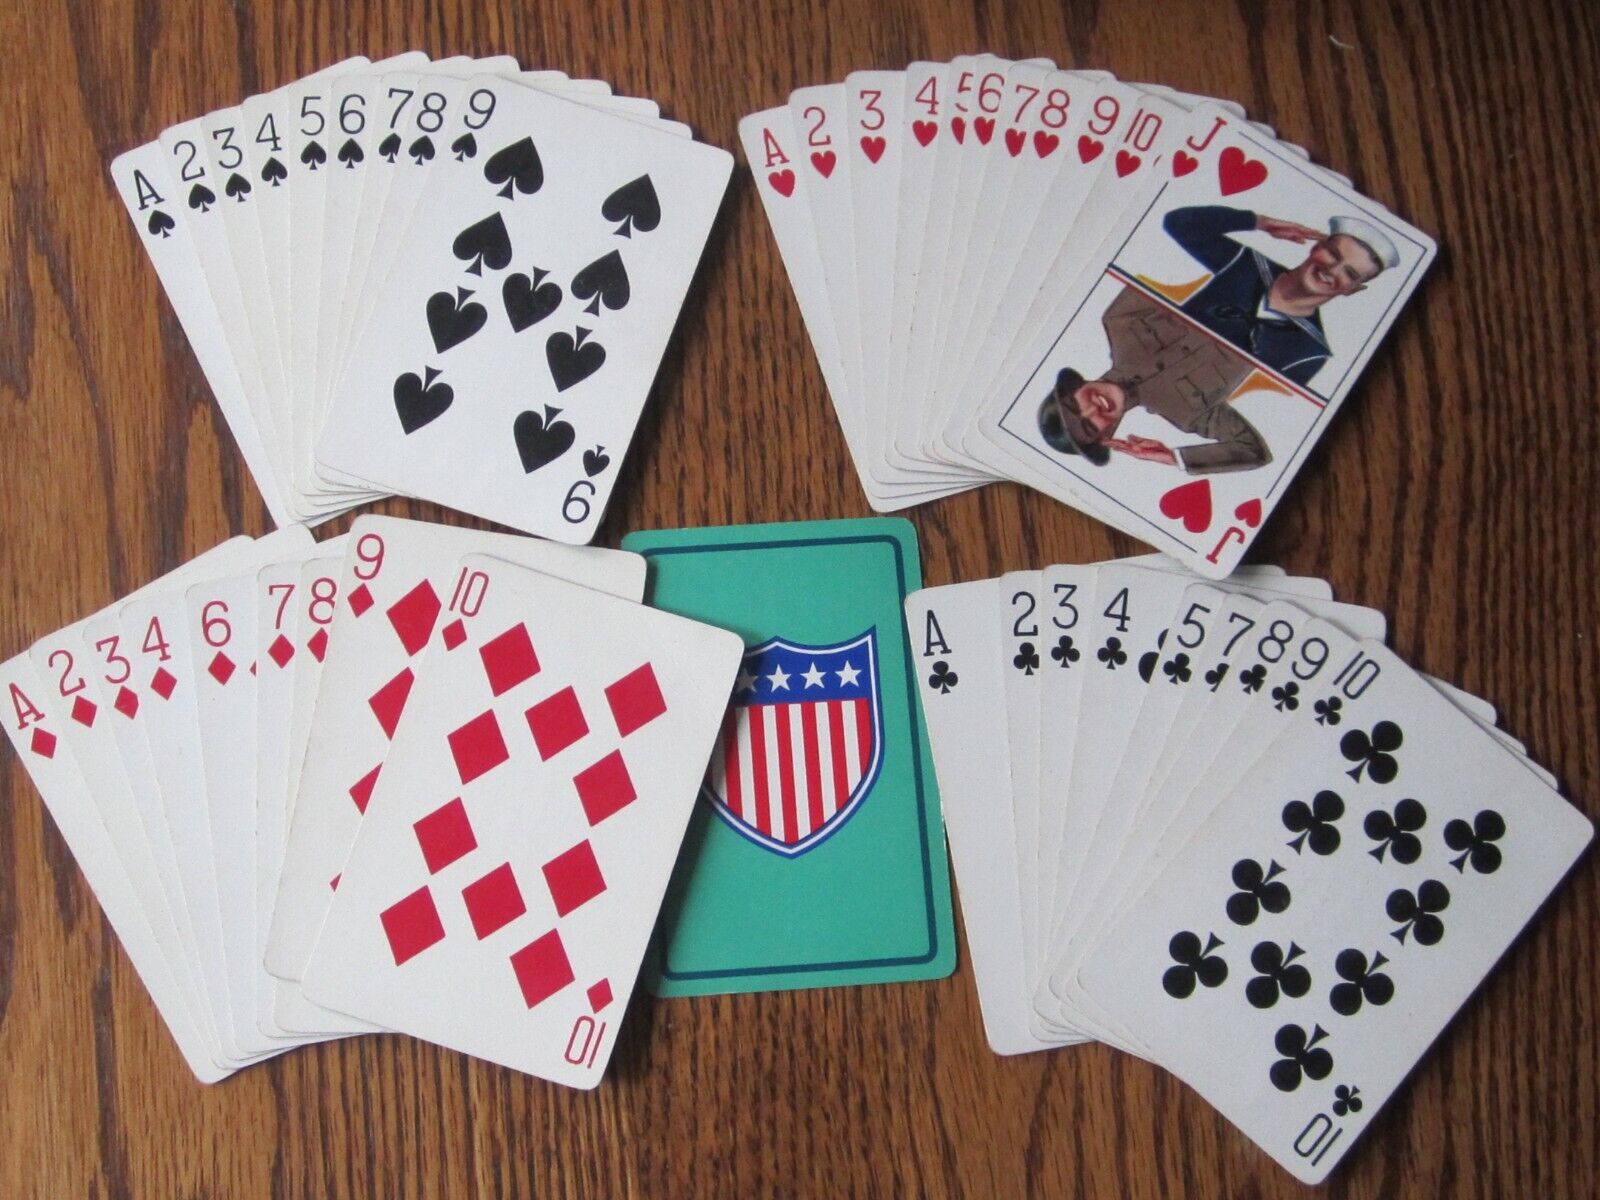 (39) WWII ERA VICTORY PLAYING CARD SWAP CARDS